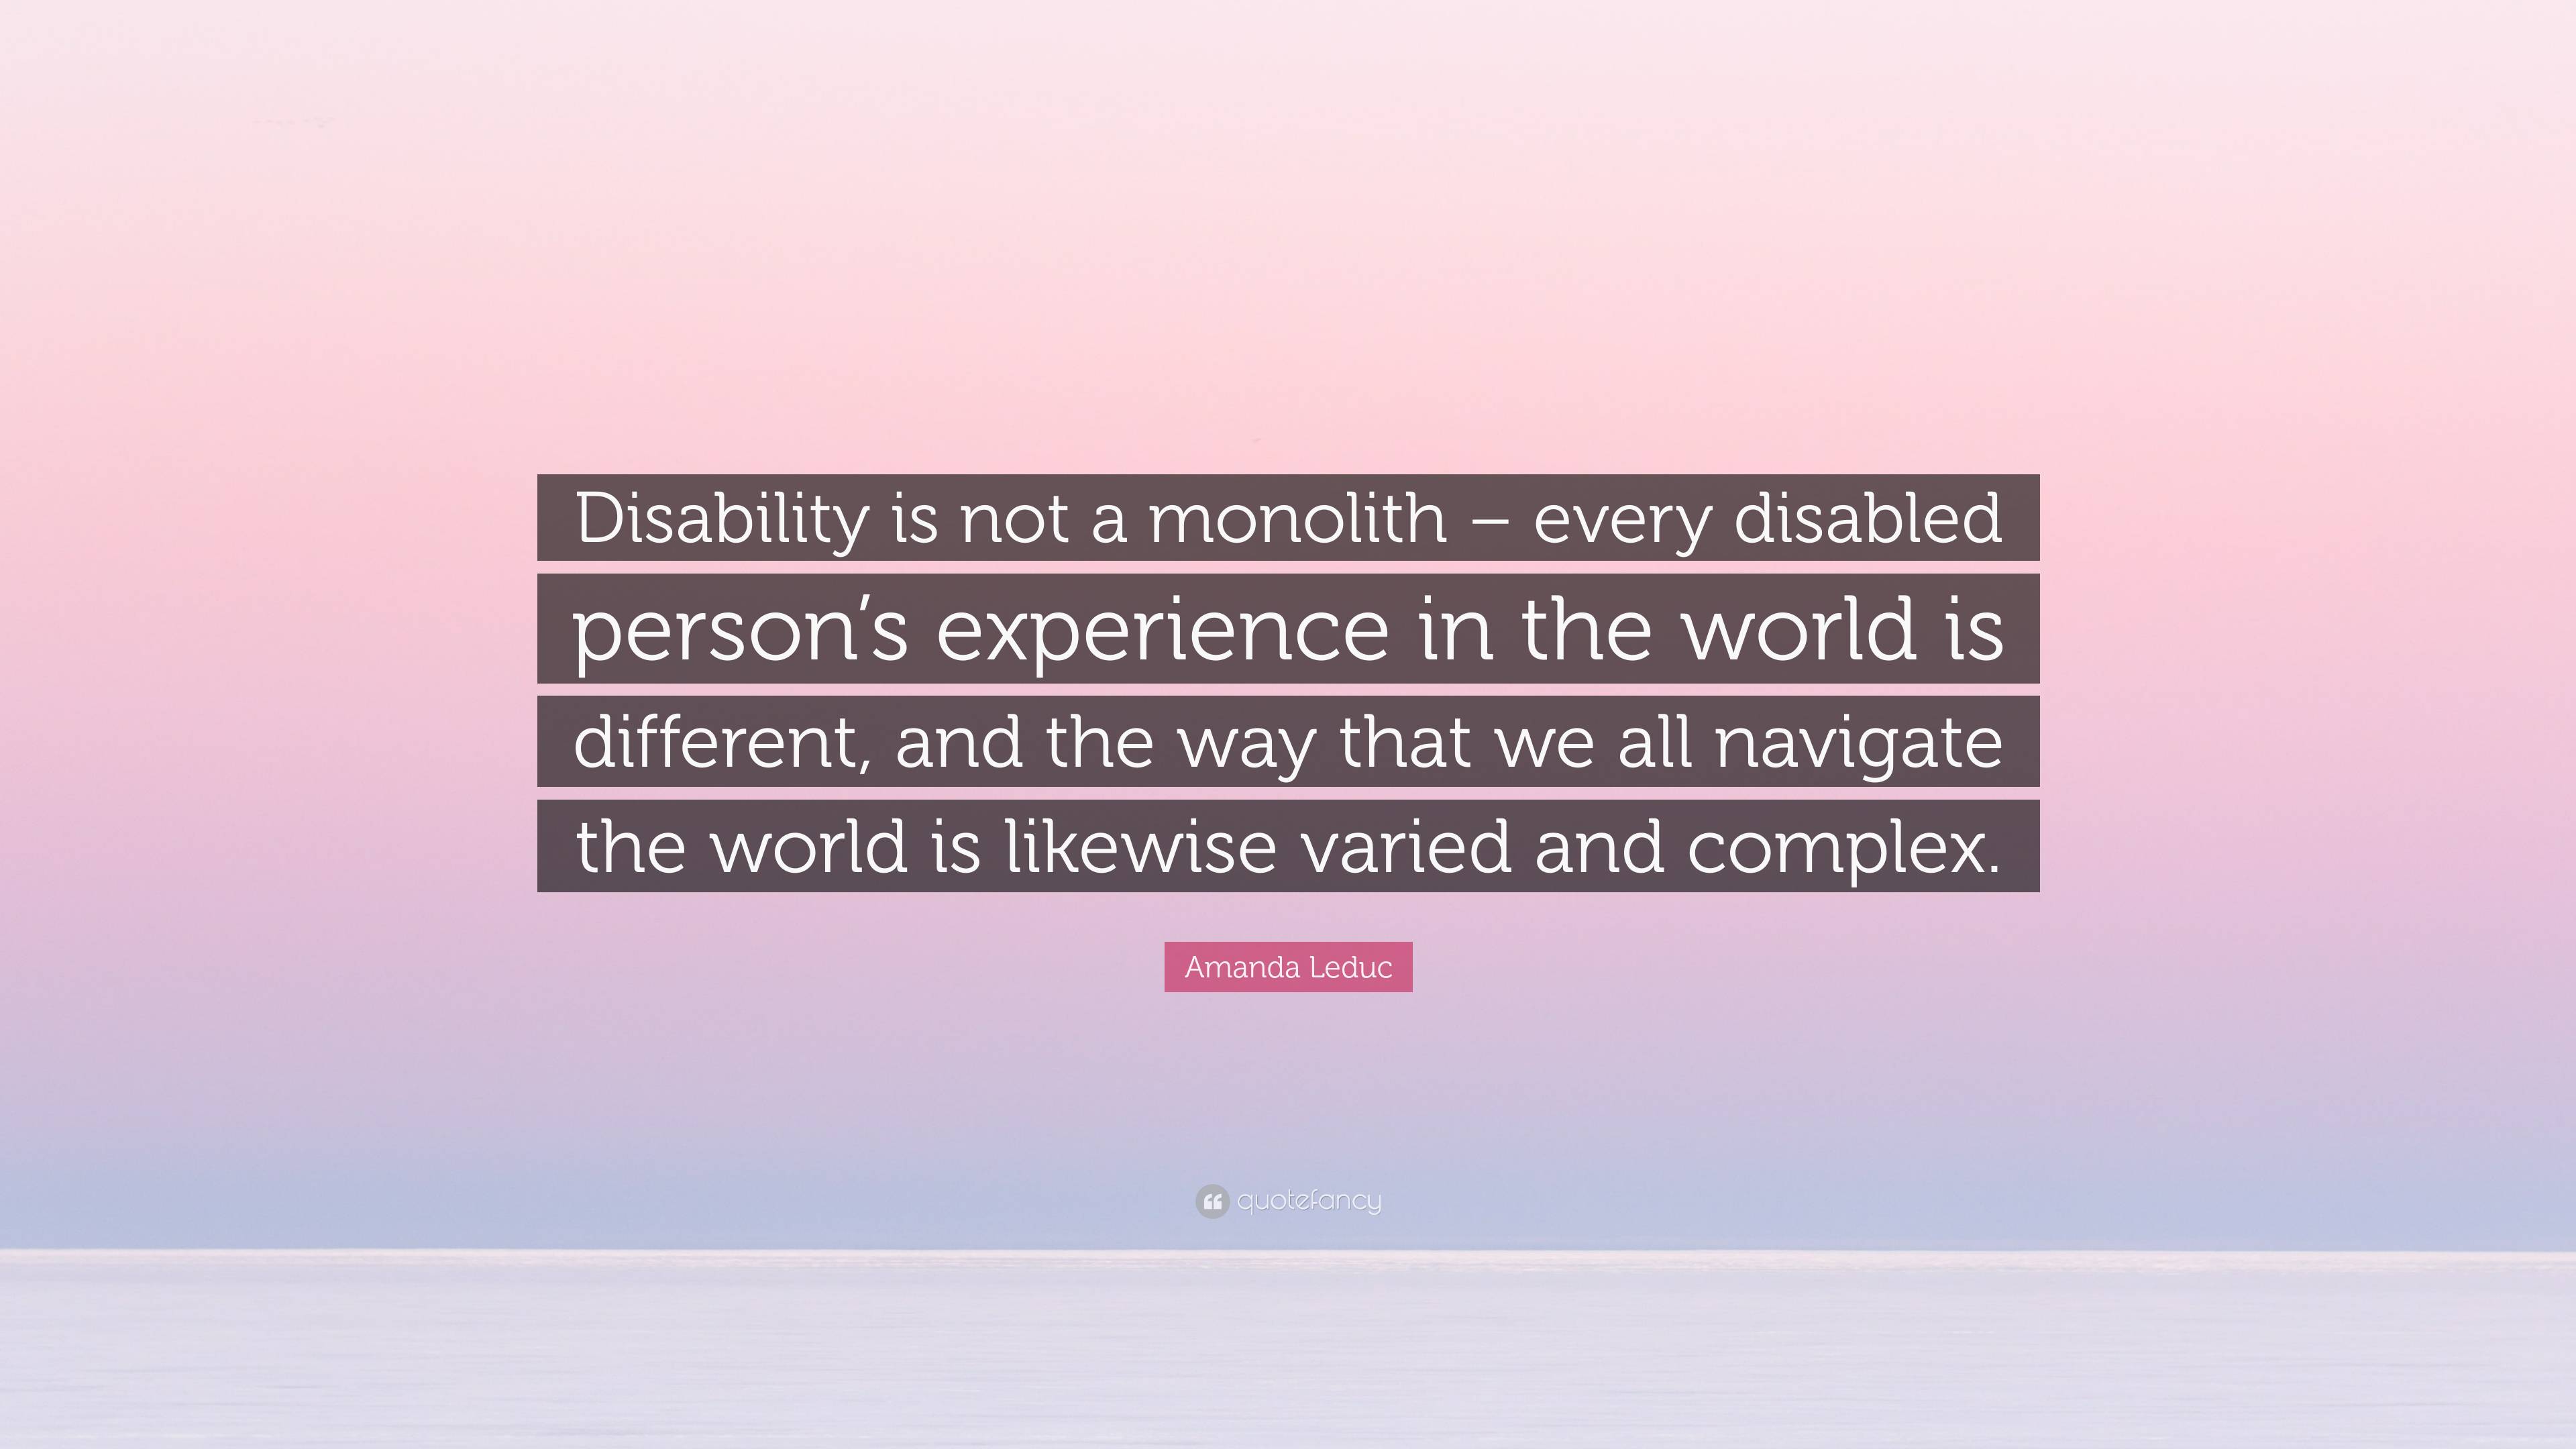 Amanda Leduc Quote: “Disability is not a monolith – every disabled person's  experience in the world is different, and the way that we all nav”